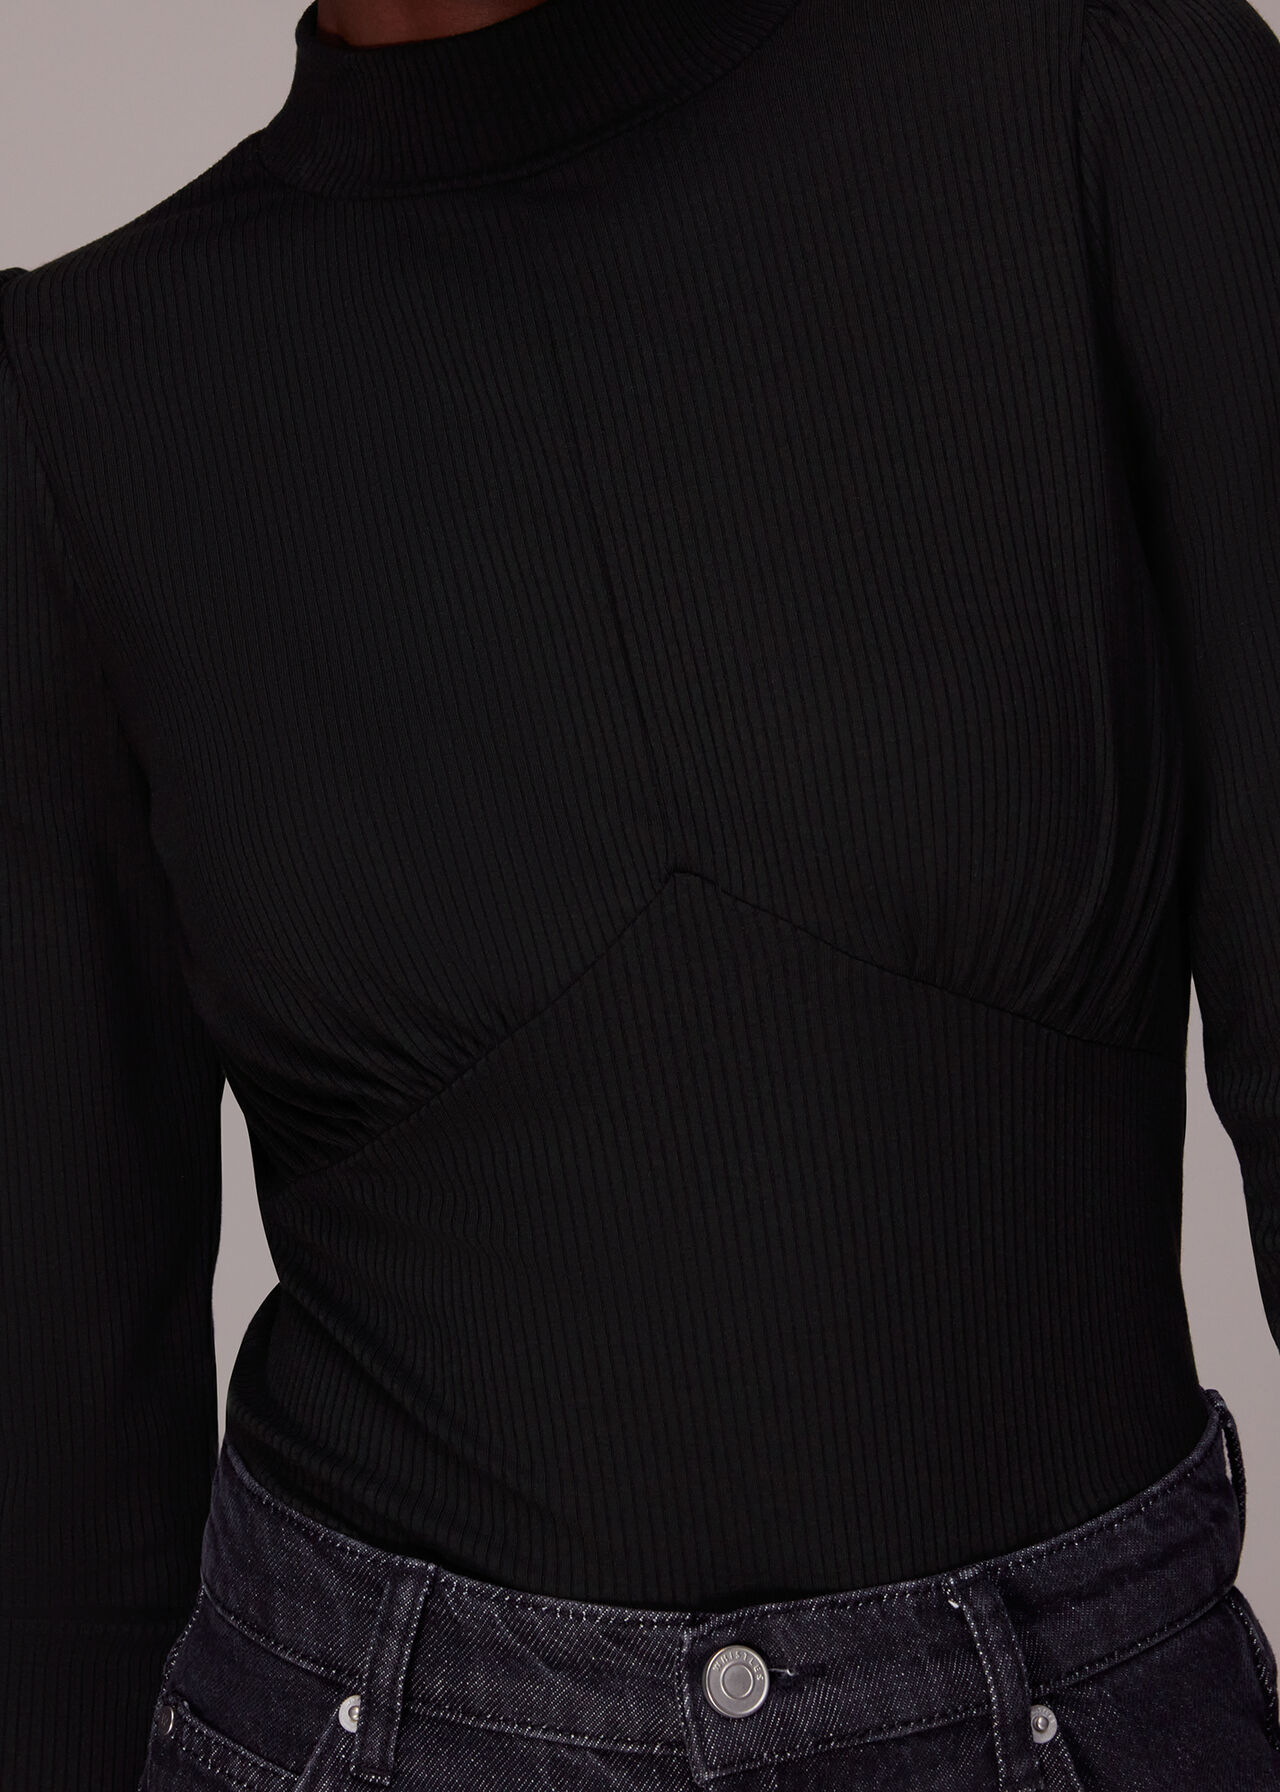 Black Gathered Bust Top | WHISTLES